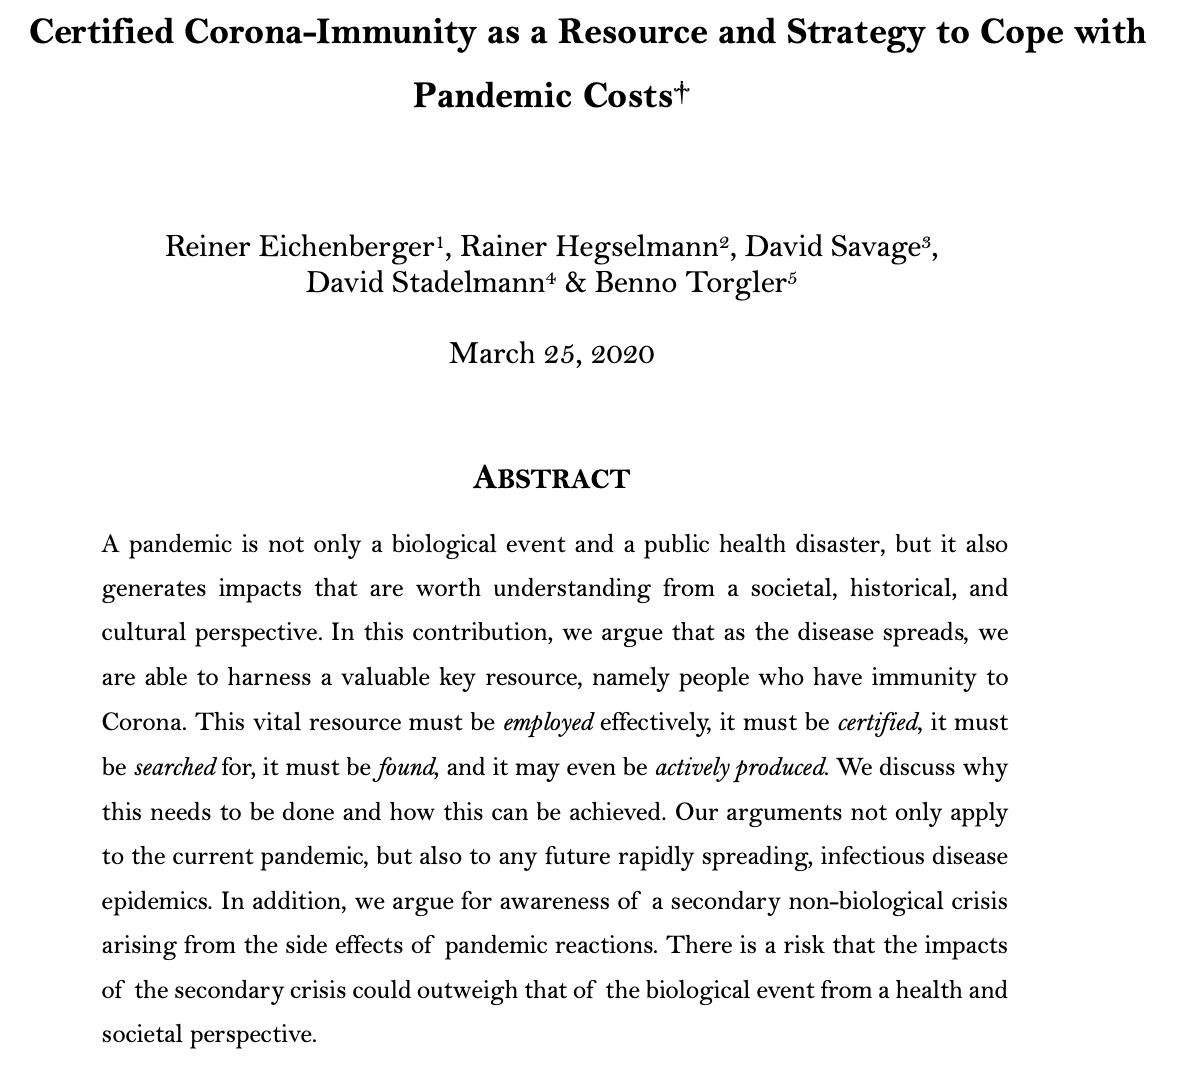 New piece by Eichenberger, Hegselmann, Savage, 
@davidstadelmann & Torgler forthcoming in 
@KyklosReview: Certified Corona-Immunity as a Resource and Strategy to Cope with Pandemic Costs

TL;DR: find immune people NOW #econtwitter #policytwitter

crema-research.ch/papers/2020-03…